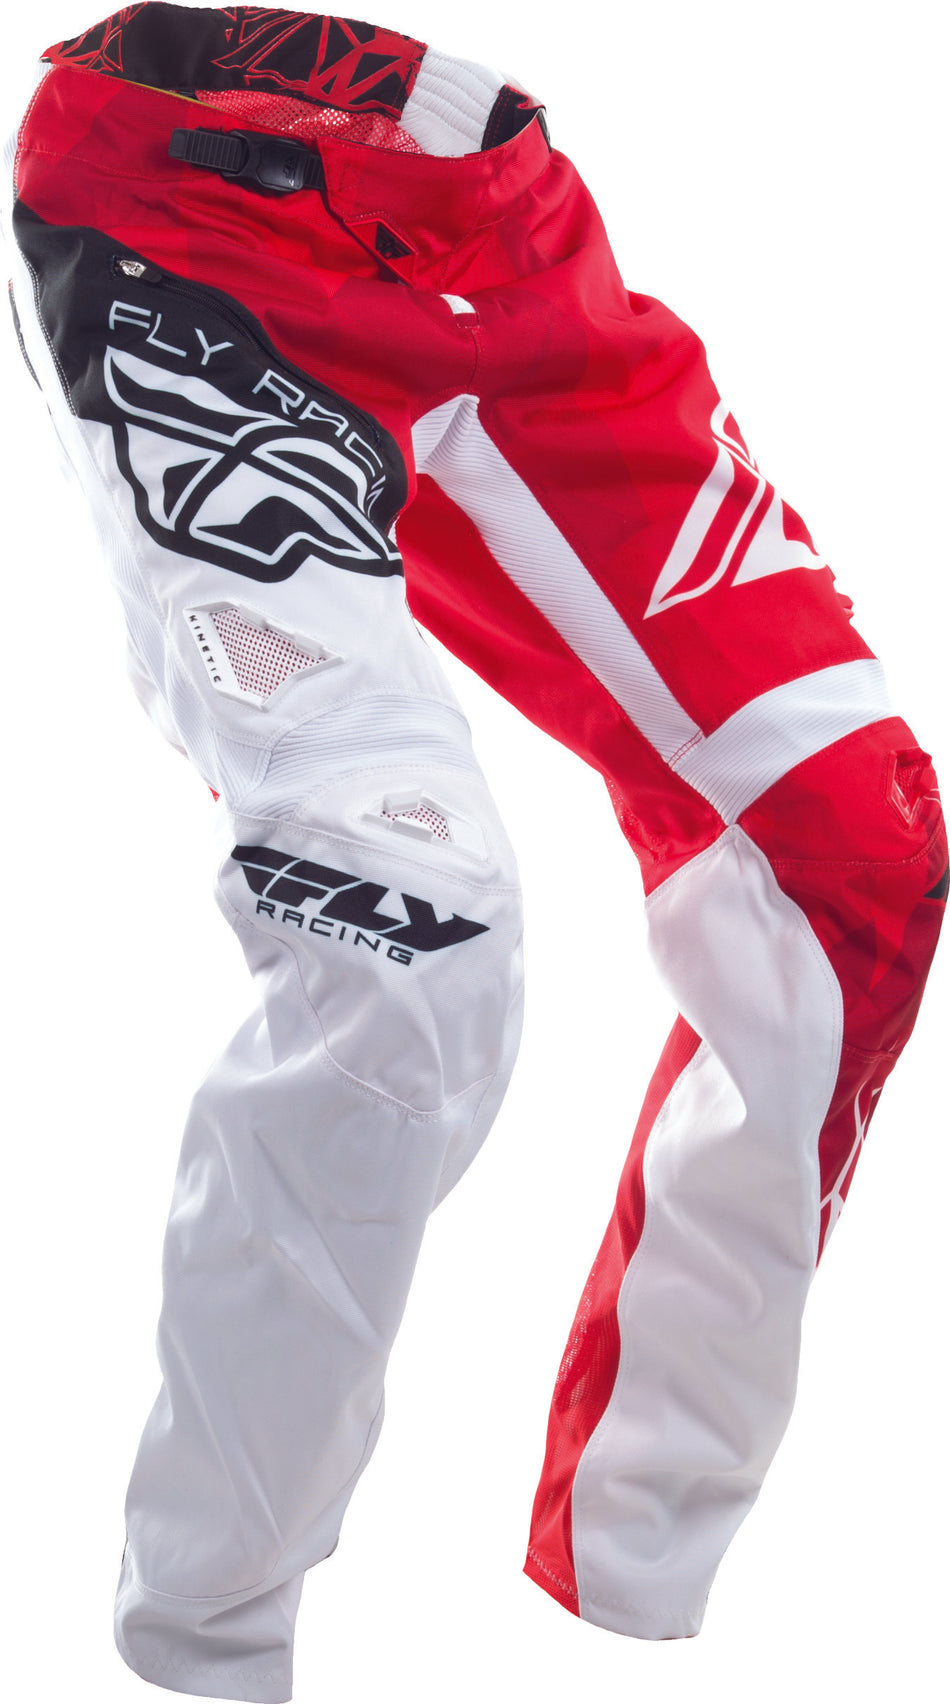 FLY RACING Bicycle Crux Pant Red/White Sz 24 370-02224